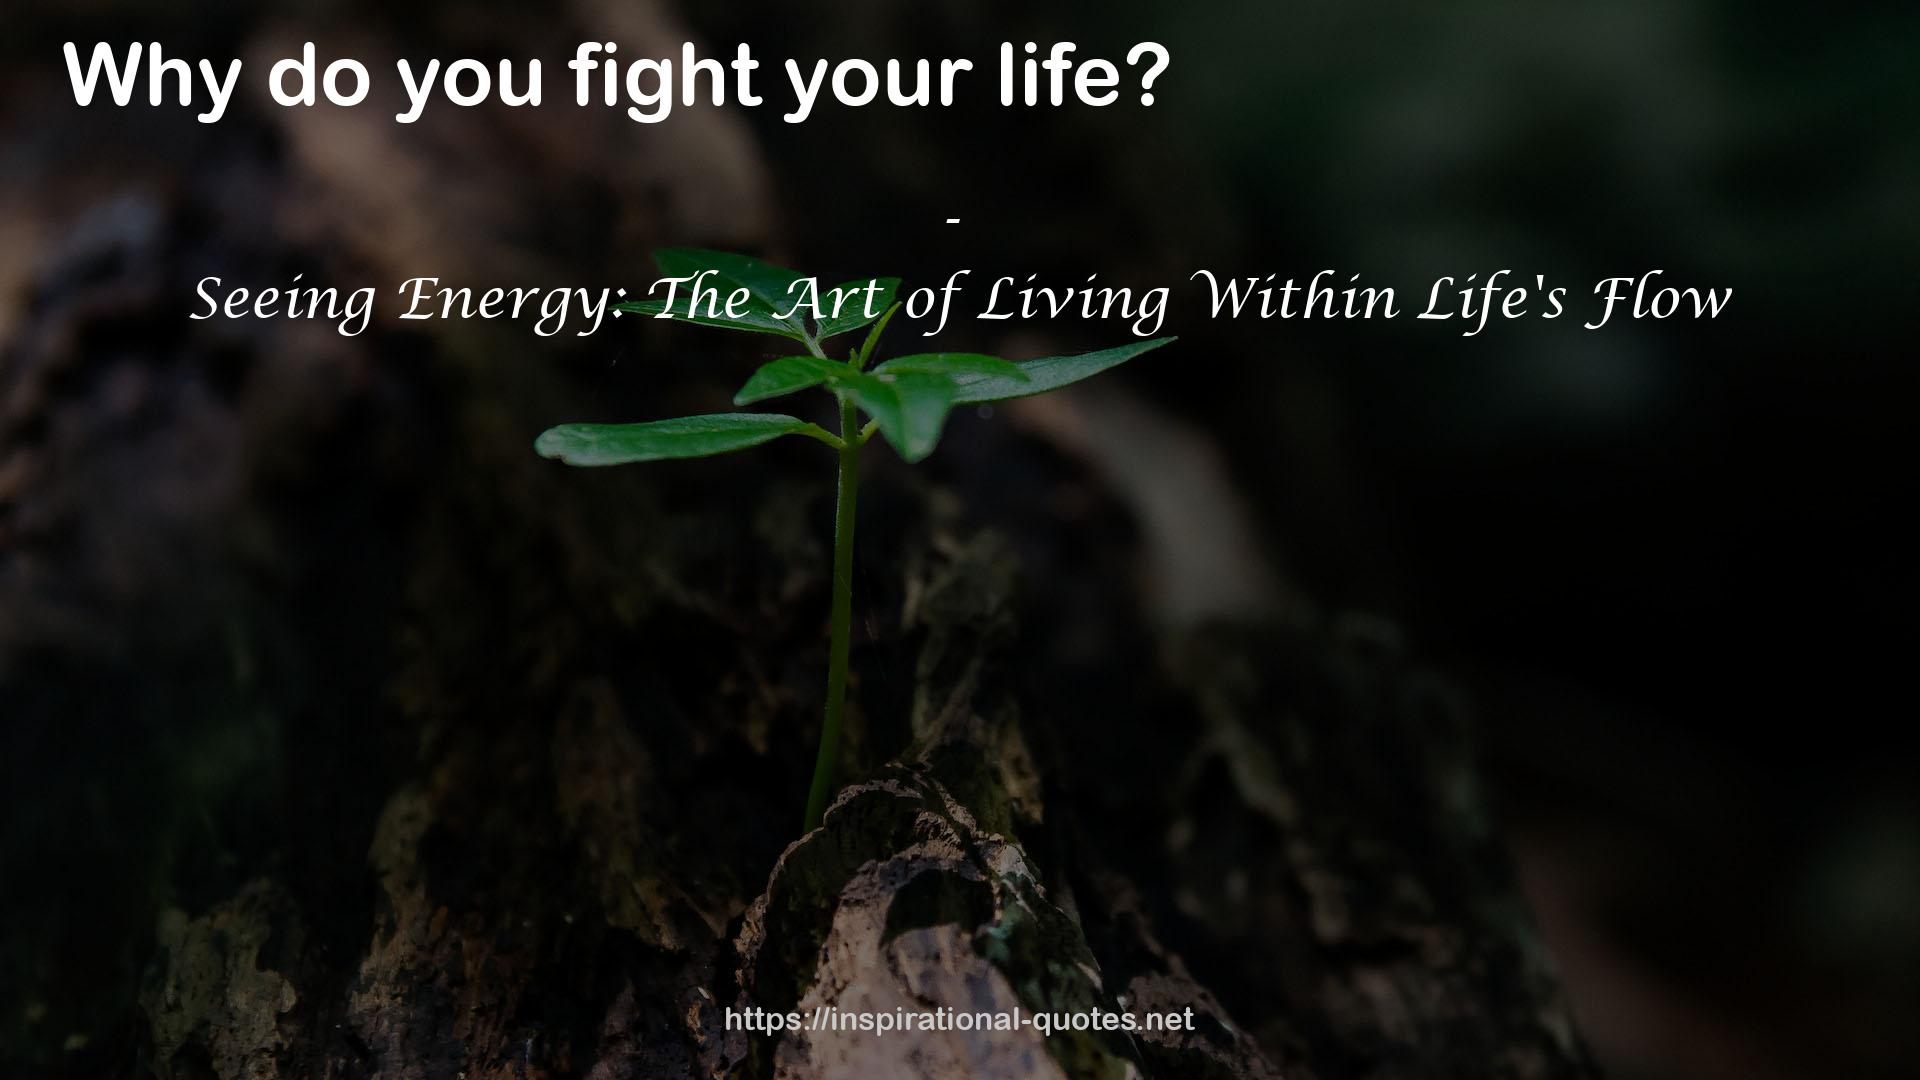 Seeing Energy: The Art of Living Within Life's Flow QUOTES